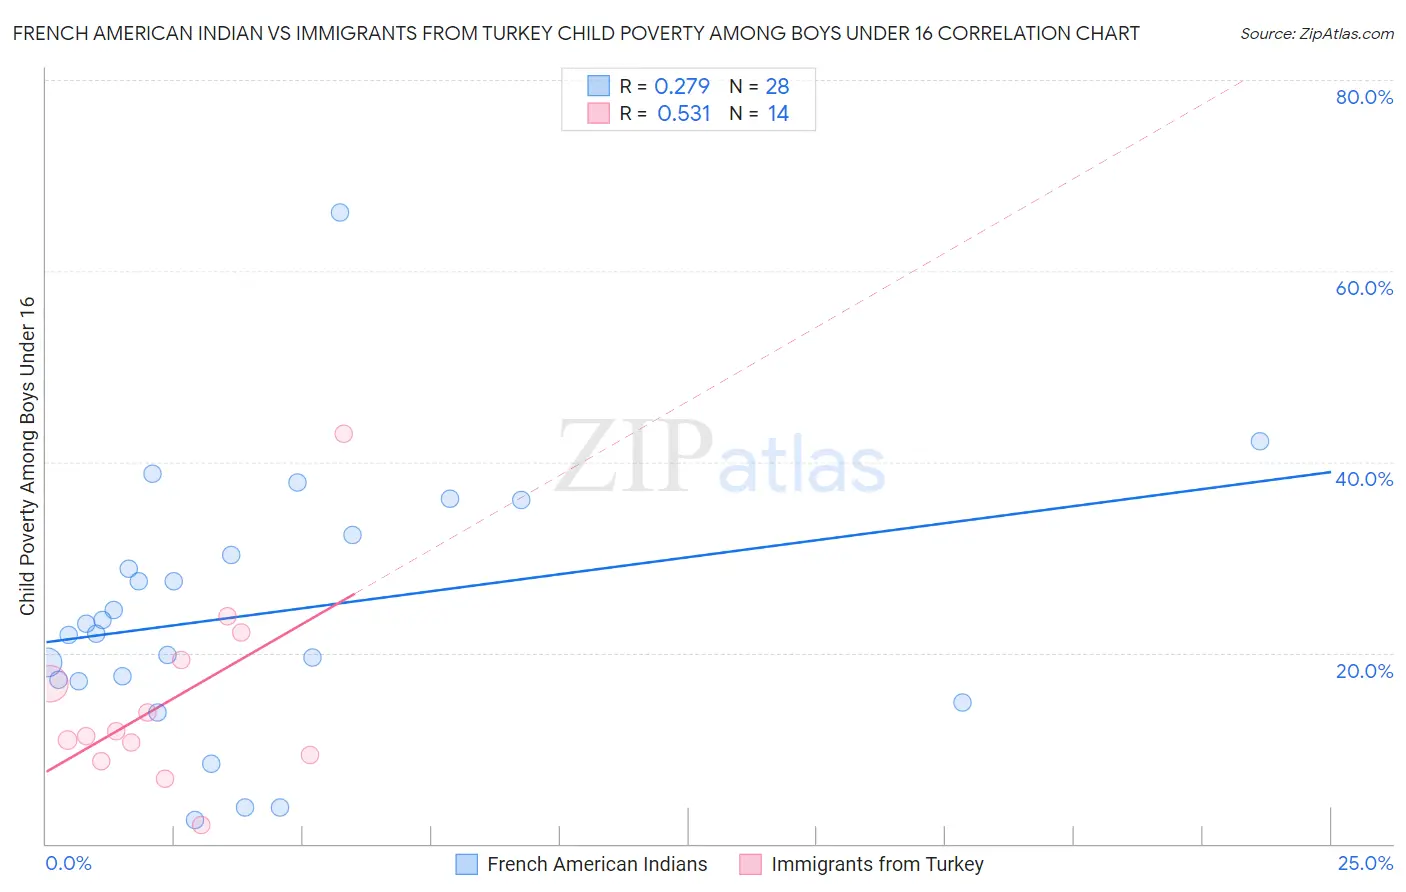 French American Indian vs Immigrants from Turkey Child Poverty Among Boys Under 16